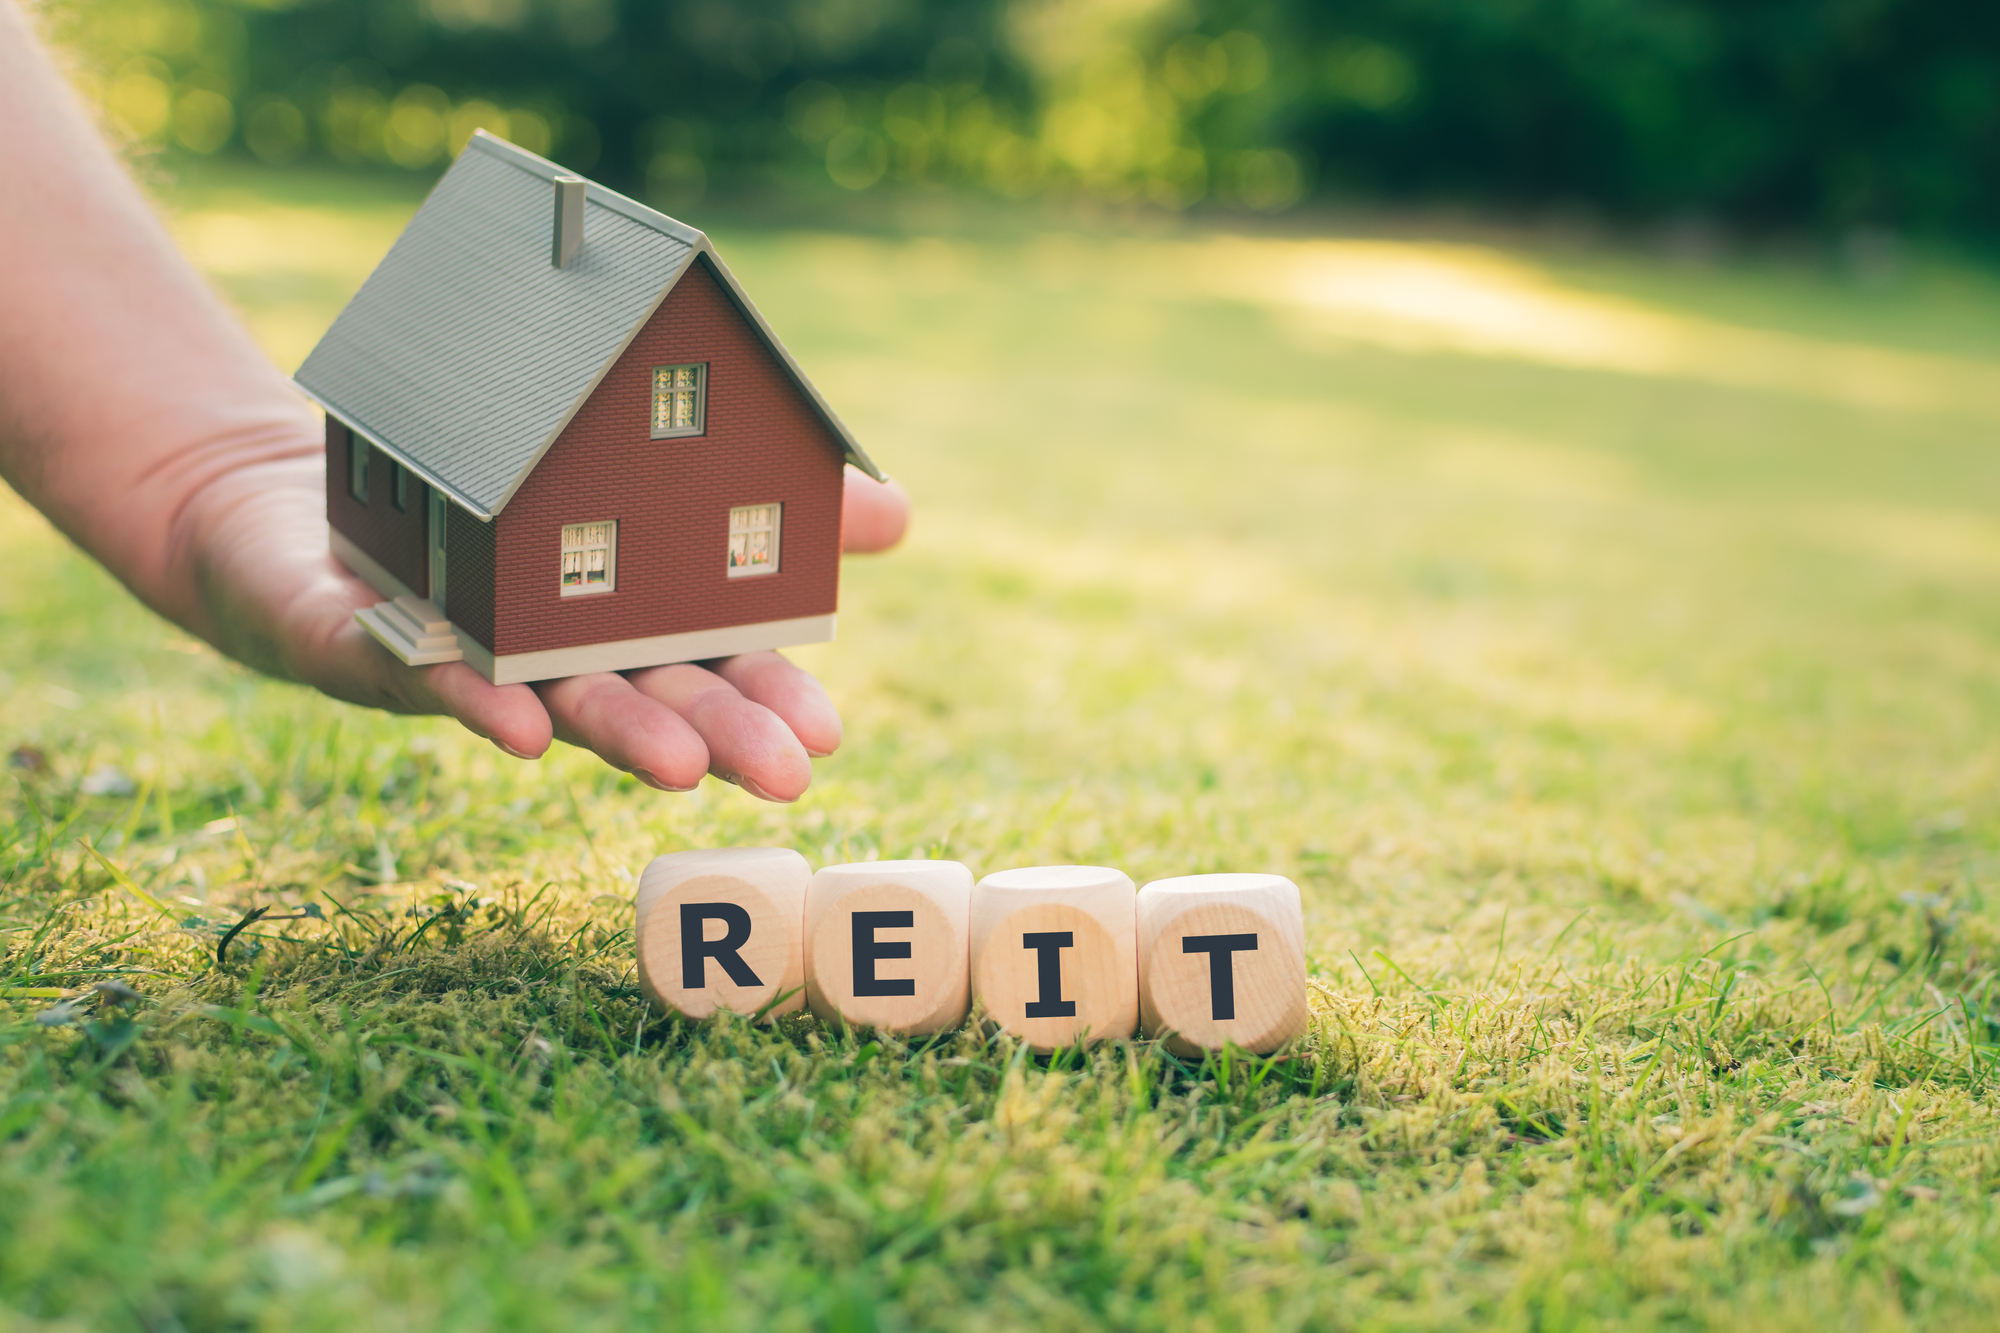 A hand holds a small model house over cubes that form “REIT,” the abbreviation for real estate investment trust.